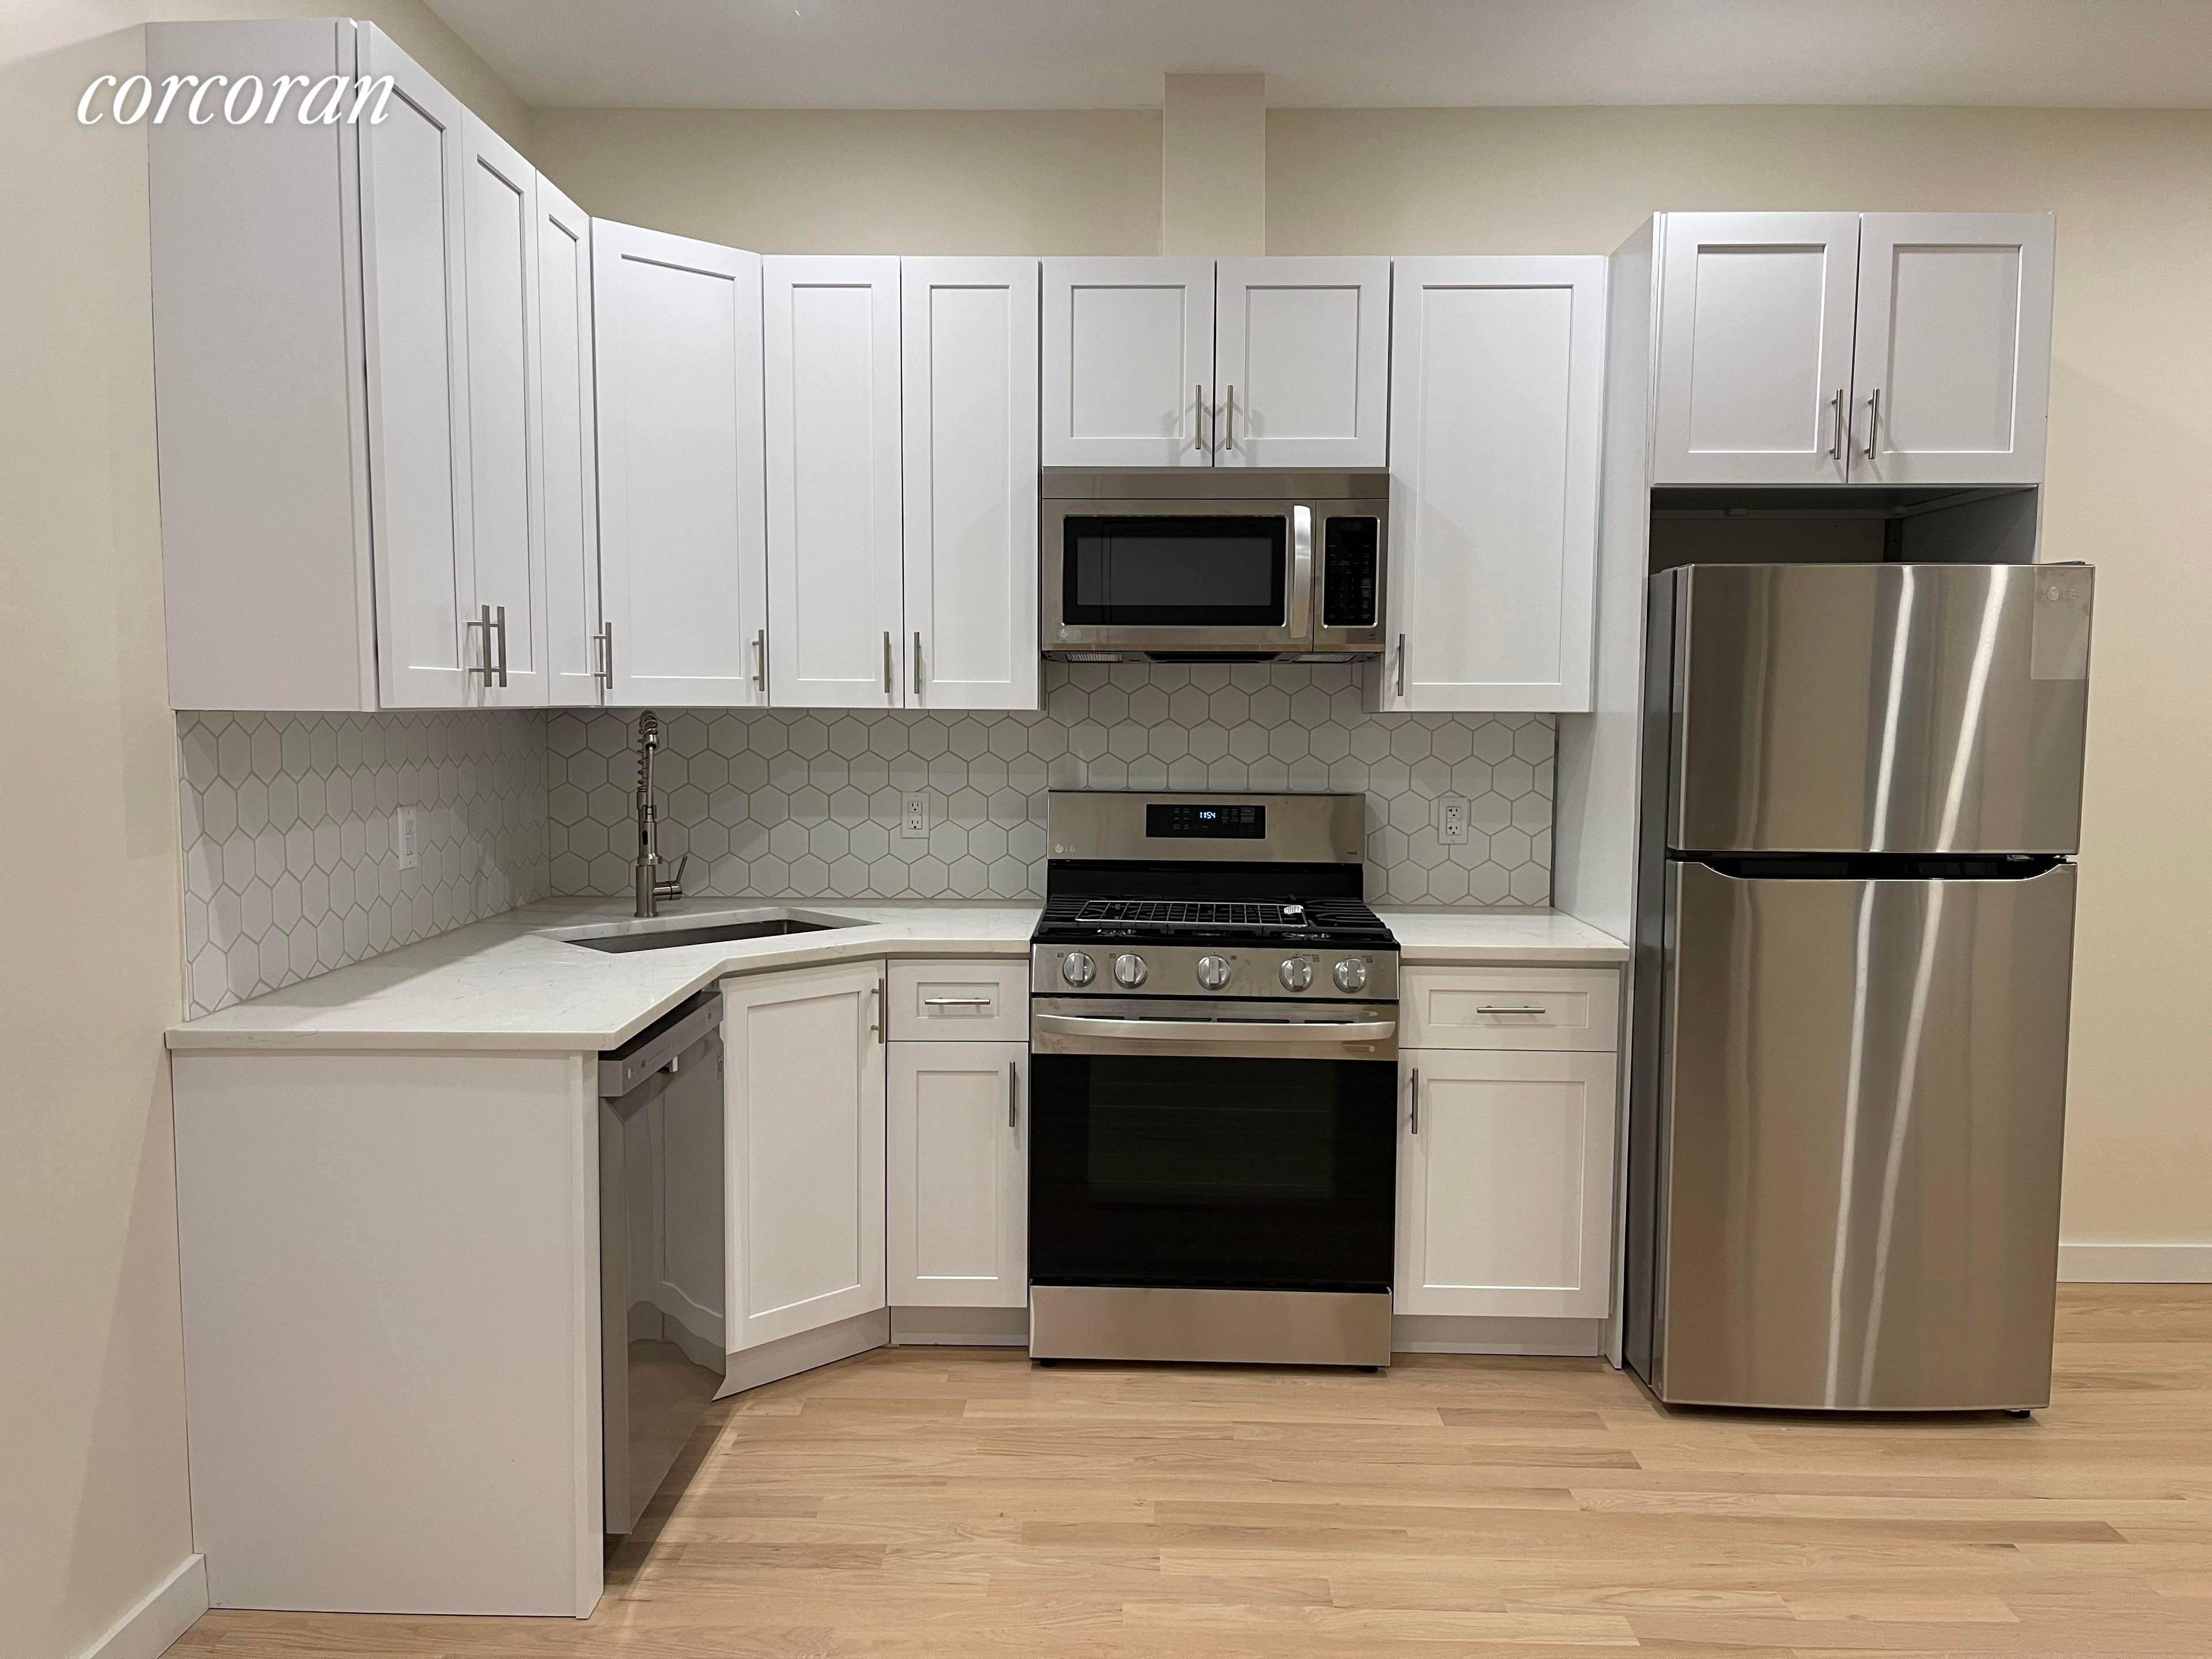 This fully renovated and spacious Flatbush find sits on the top floor of a 2 family building.